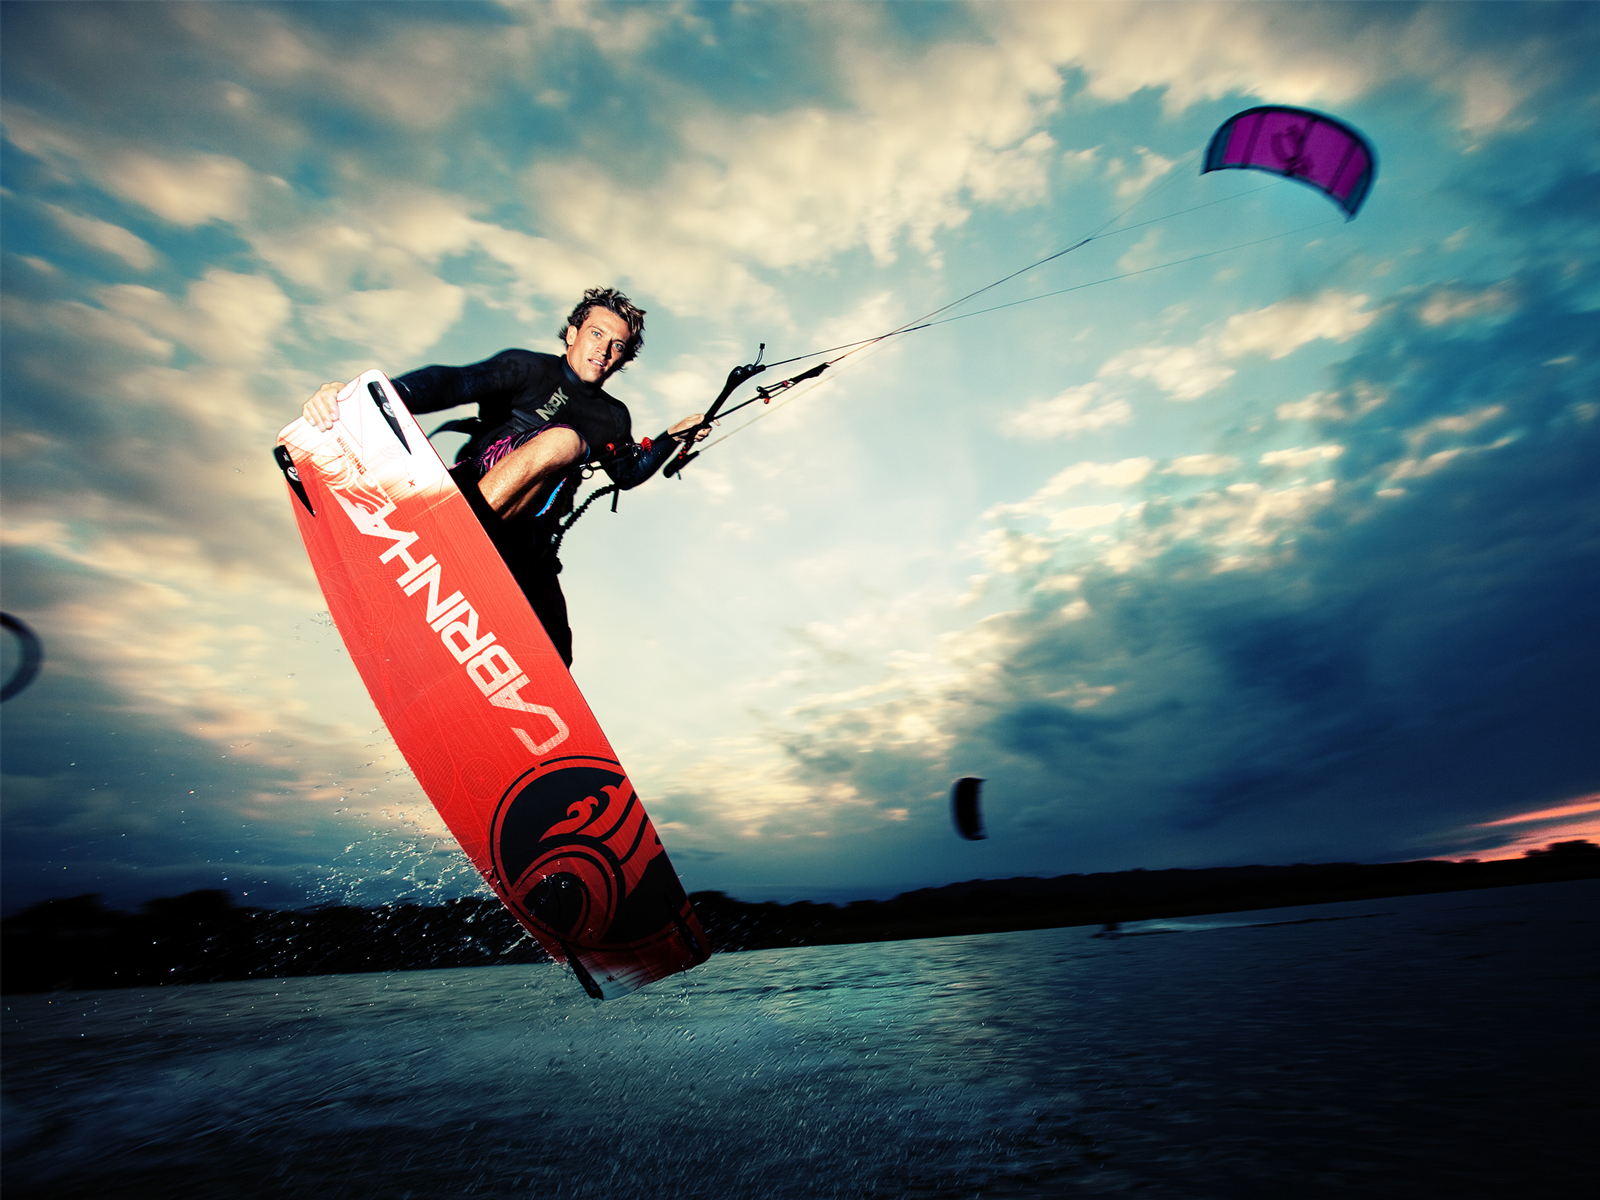 kitesurf wallpaper image - Damien LeRoy with a tailgrab at dusk on his Cabrinha kites gear - in resolution: Standard 4:3 1600 X 1200